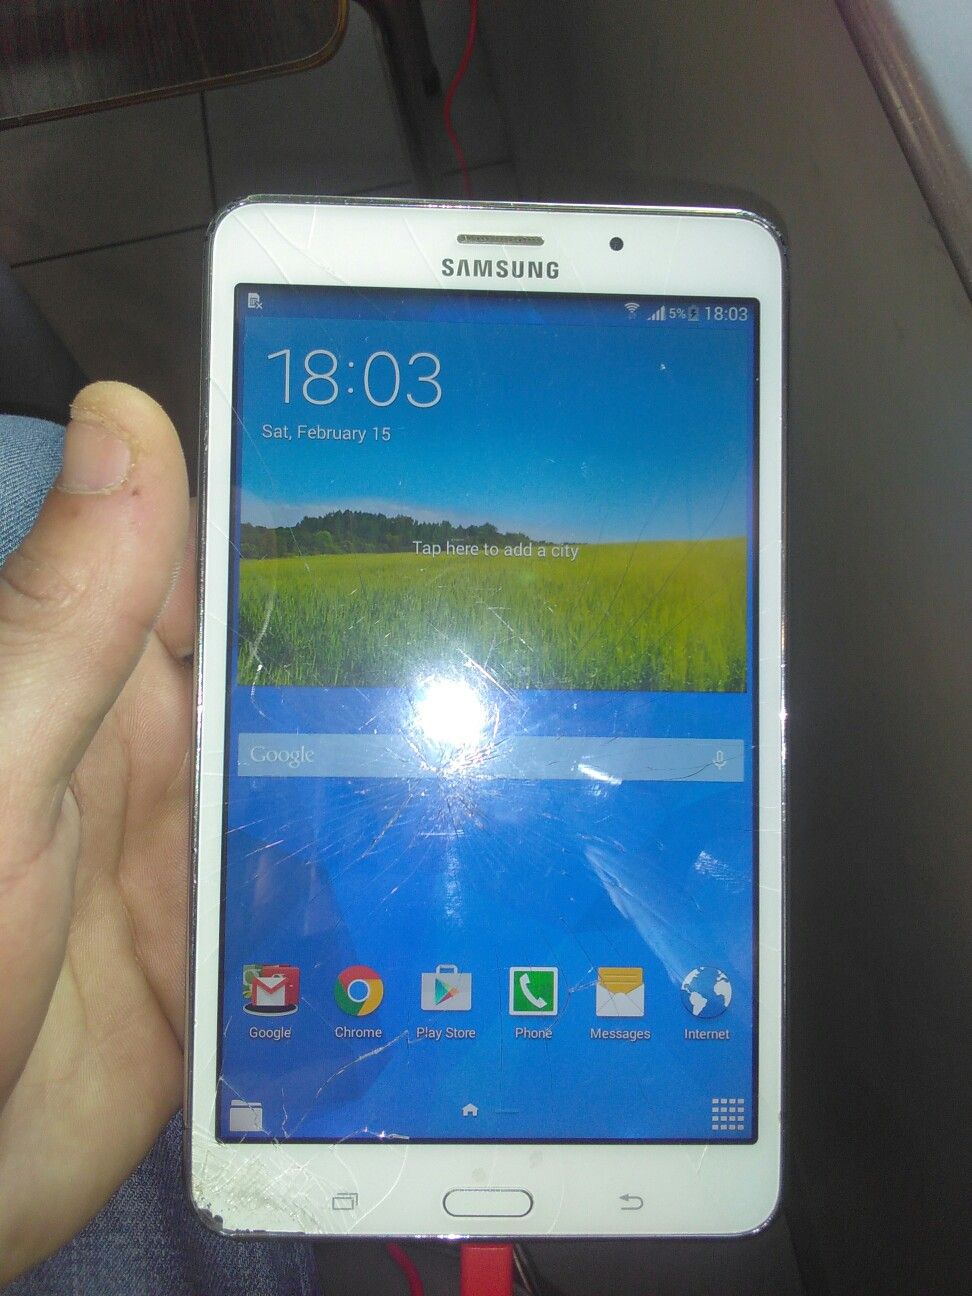 Samsung Tab 4 - can take a sim and use as phone